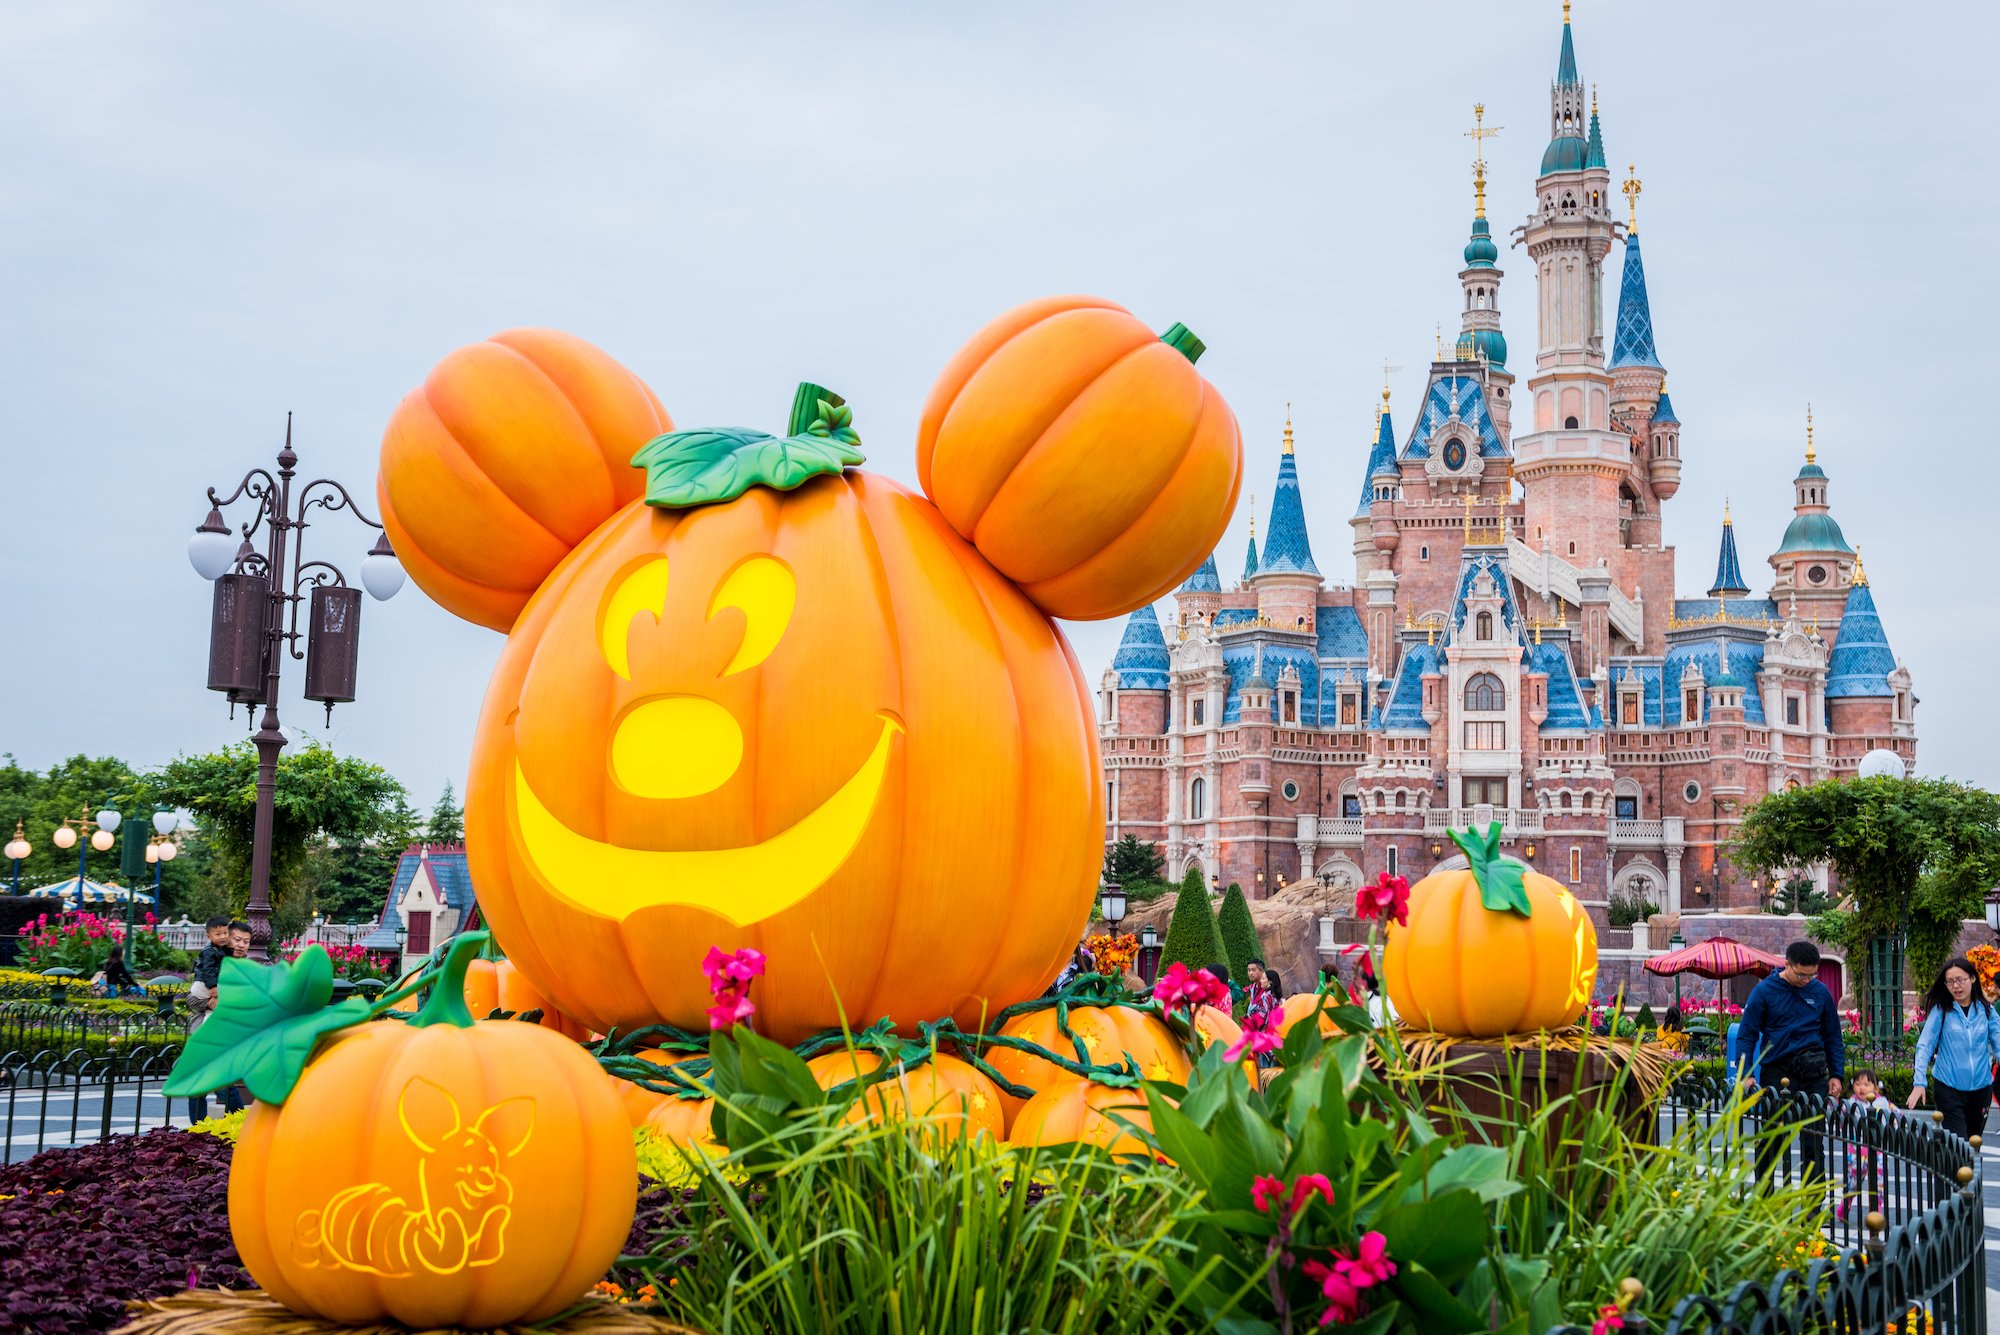 A Halloween-themed pumpkin featuring Disney's Mickey Mouse on display at Shanghai Disney Resort on October 14, 2018 in Shanghai, China.